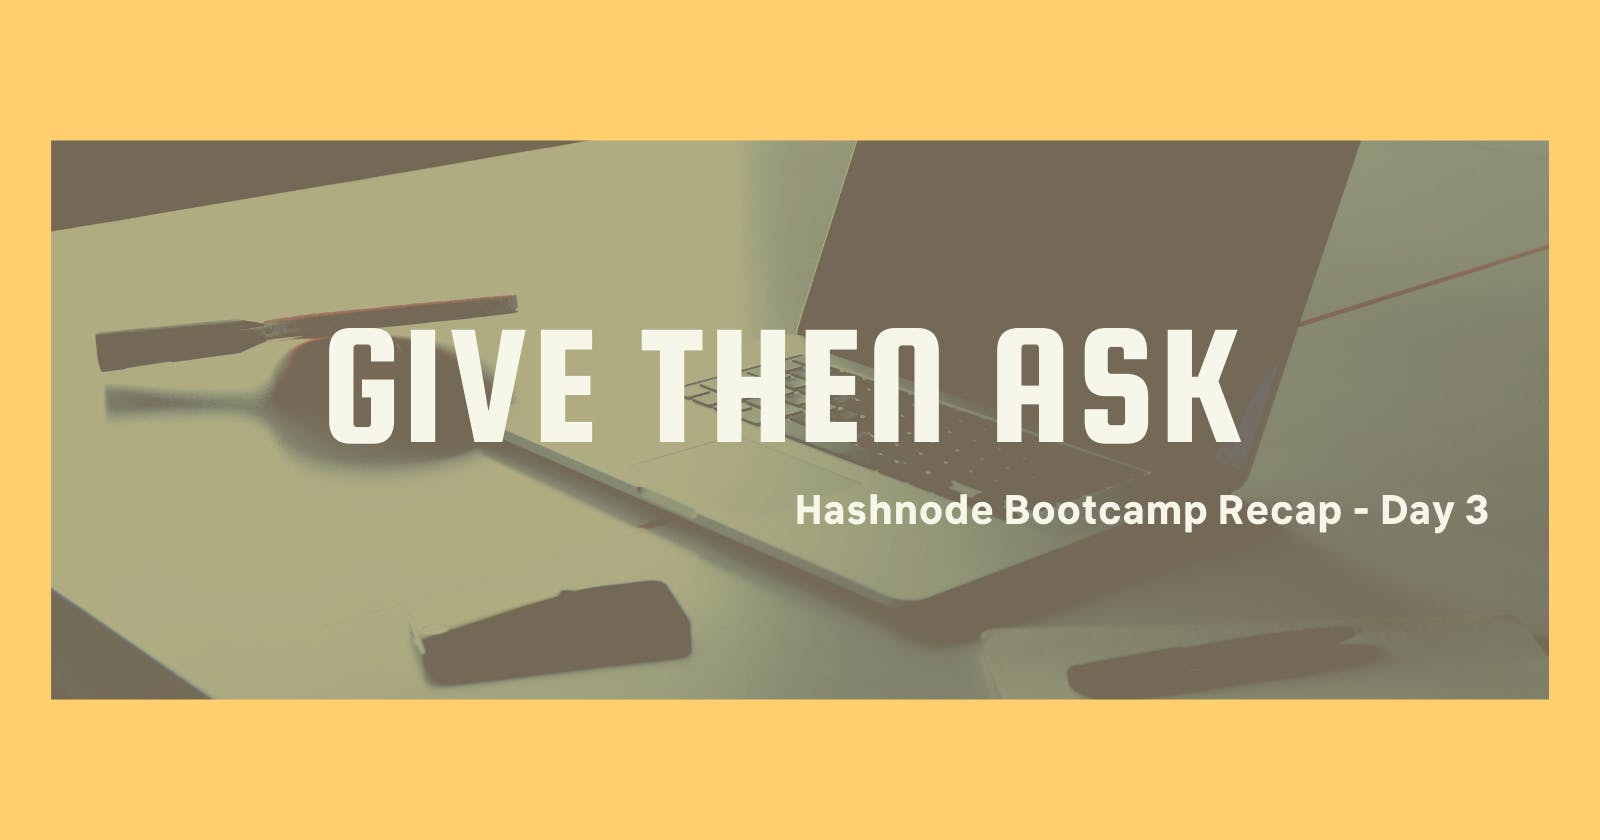 Hashnode Bootcamp: Give Then Ask